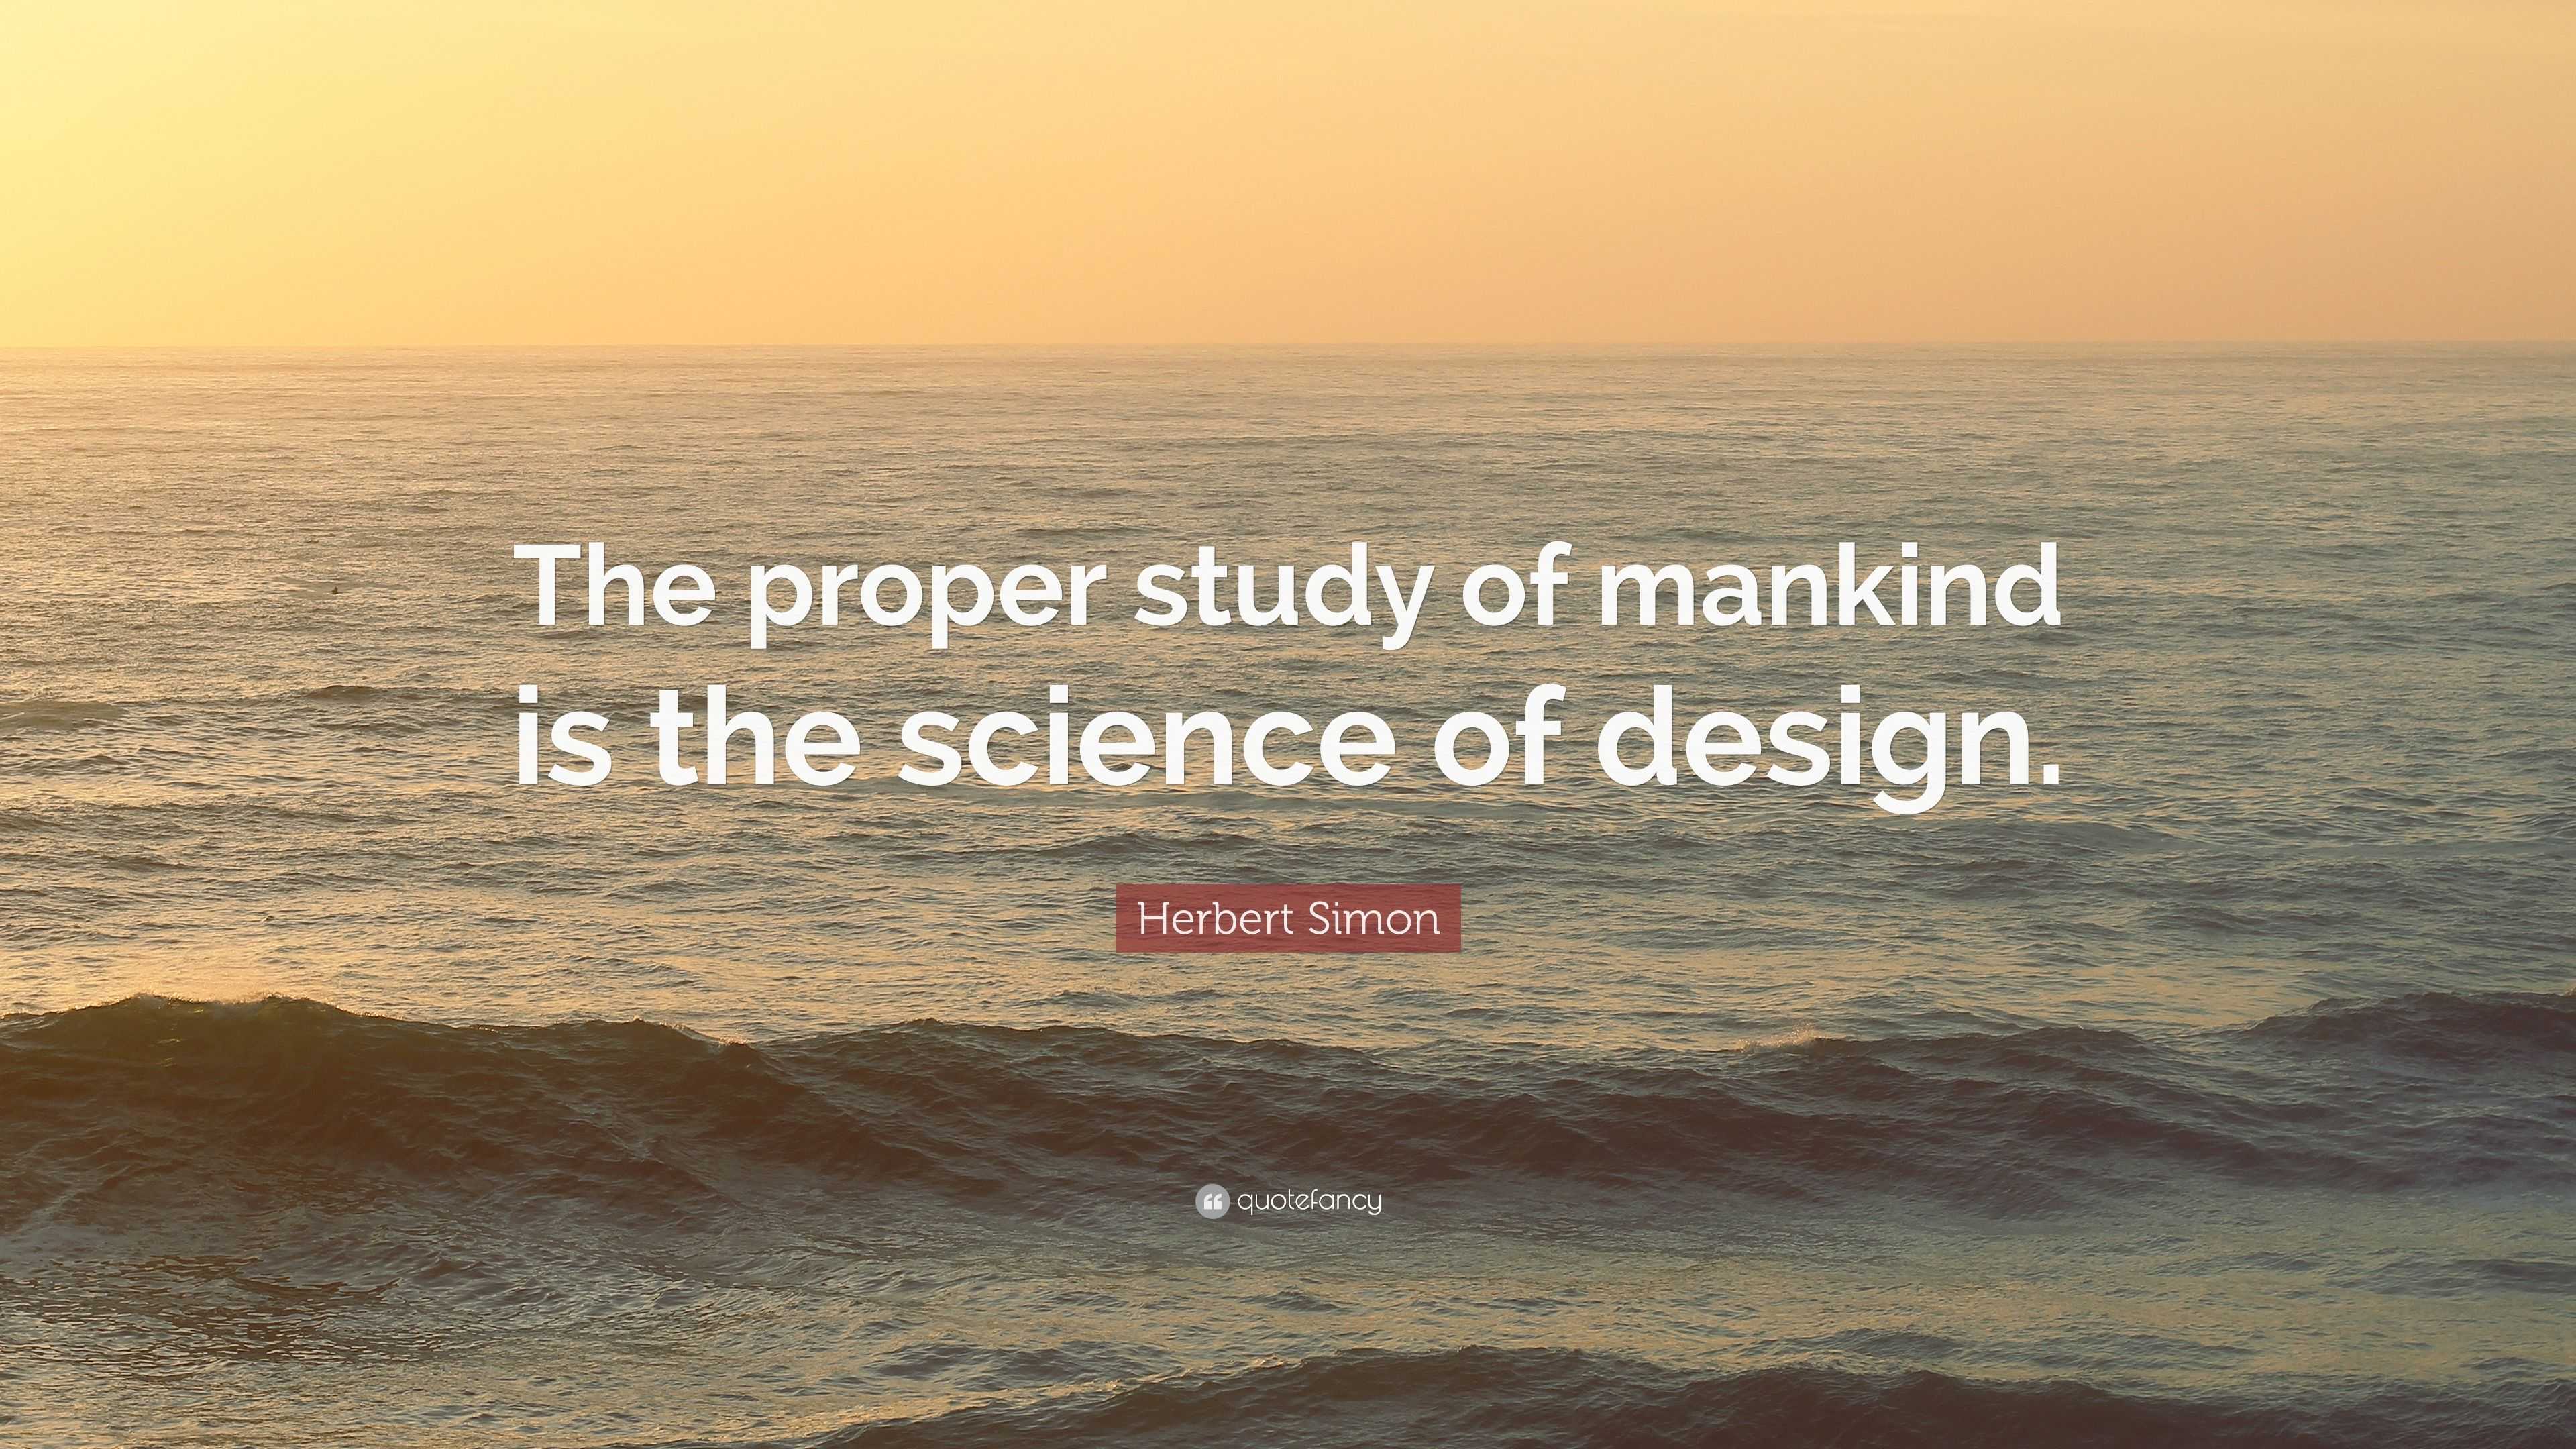 Herbert Simon Quote “The proper study of mankind is the science of